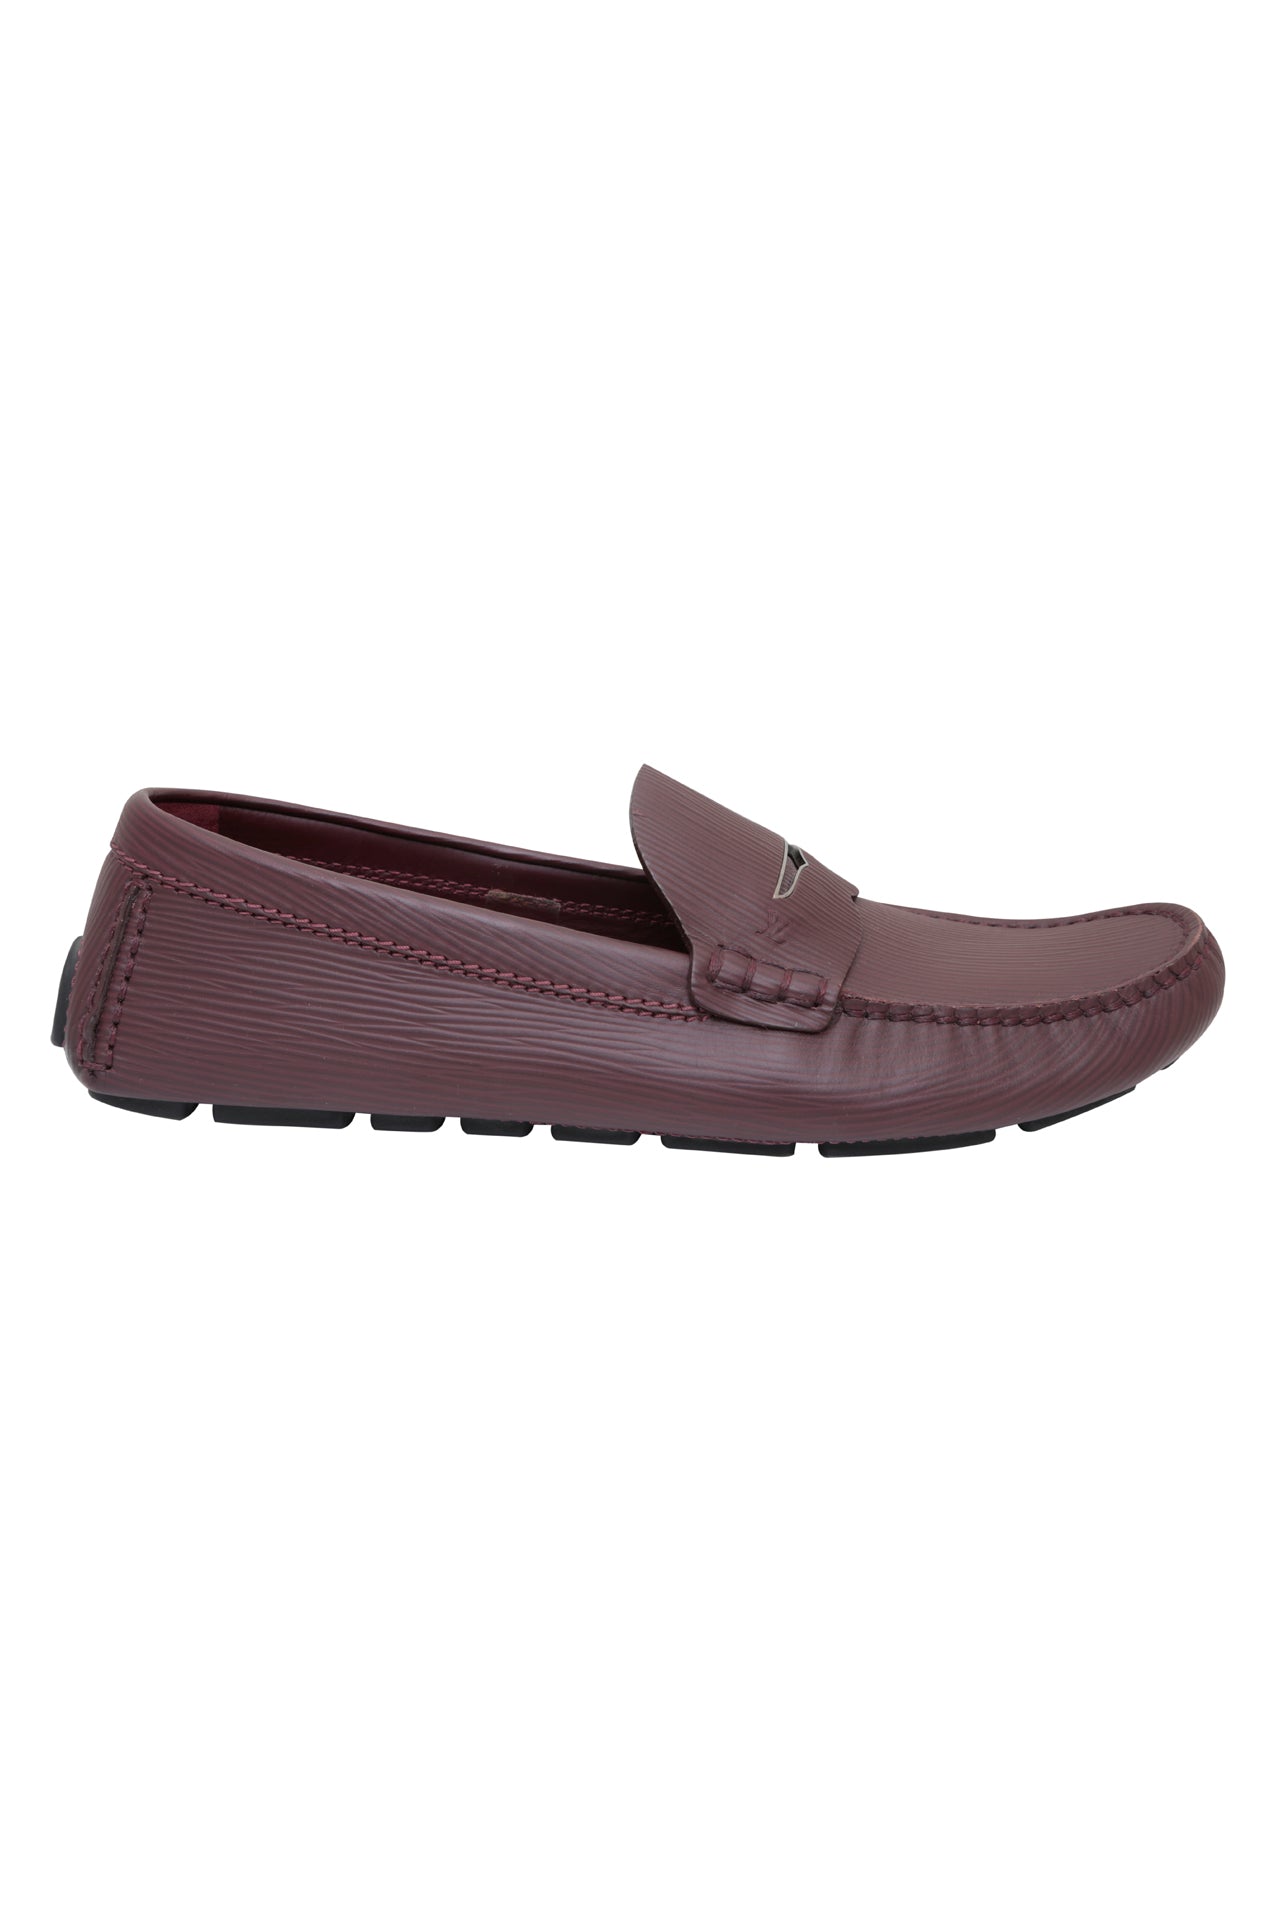 Louis Vuitton Epi Leather Penny Loafers Maroon UK 9